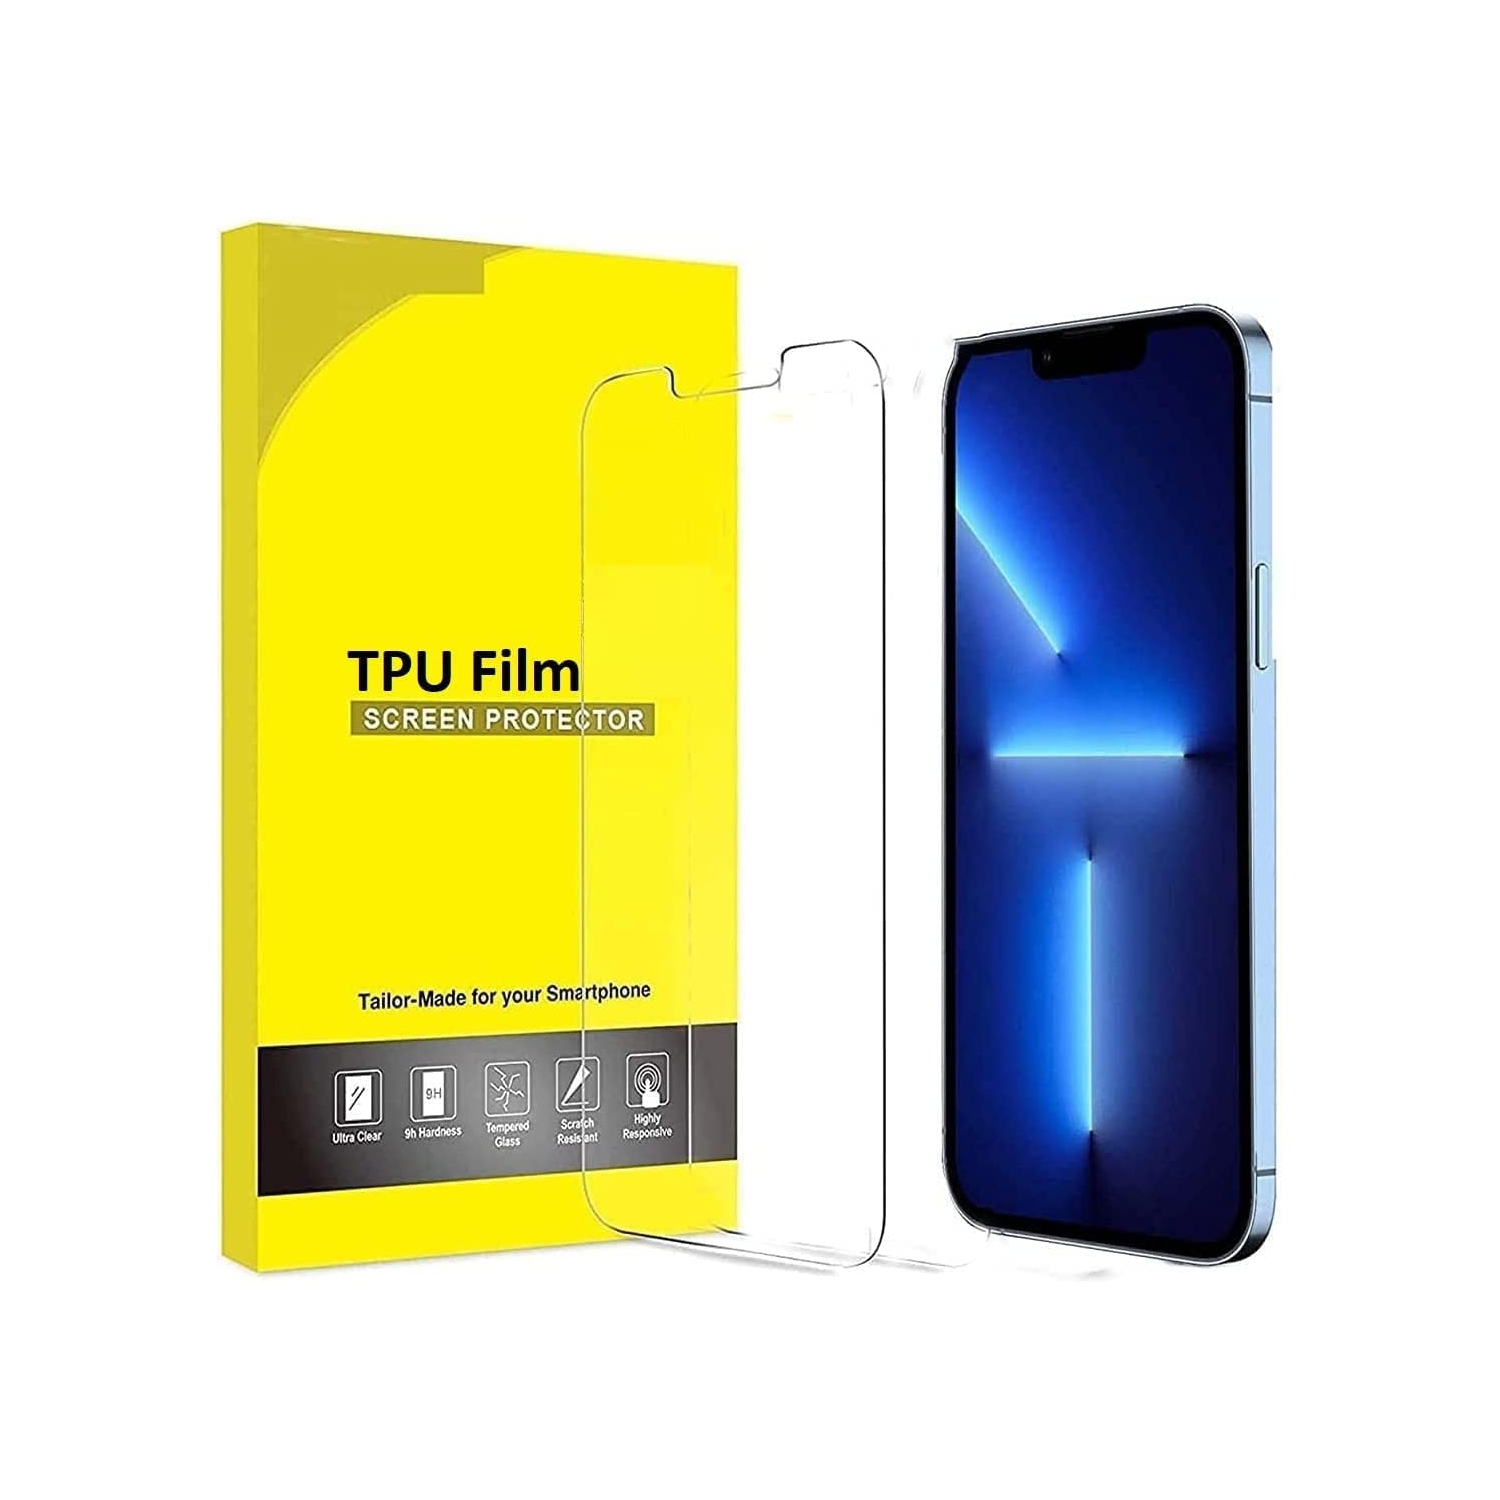 Safety Glass Samsung Galaxy S21 Ultra Screen Protector 6.8 Inches 1x Flexible TPU Film, Easy Installation Anti-Scratch (Samsung Galaxy S21 Ultra, 1 Pcs)